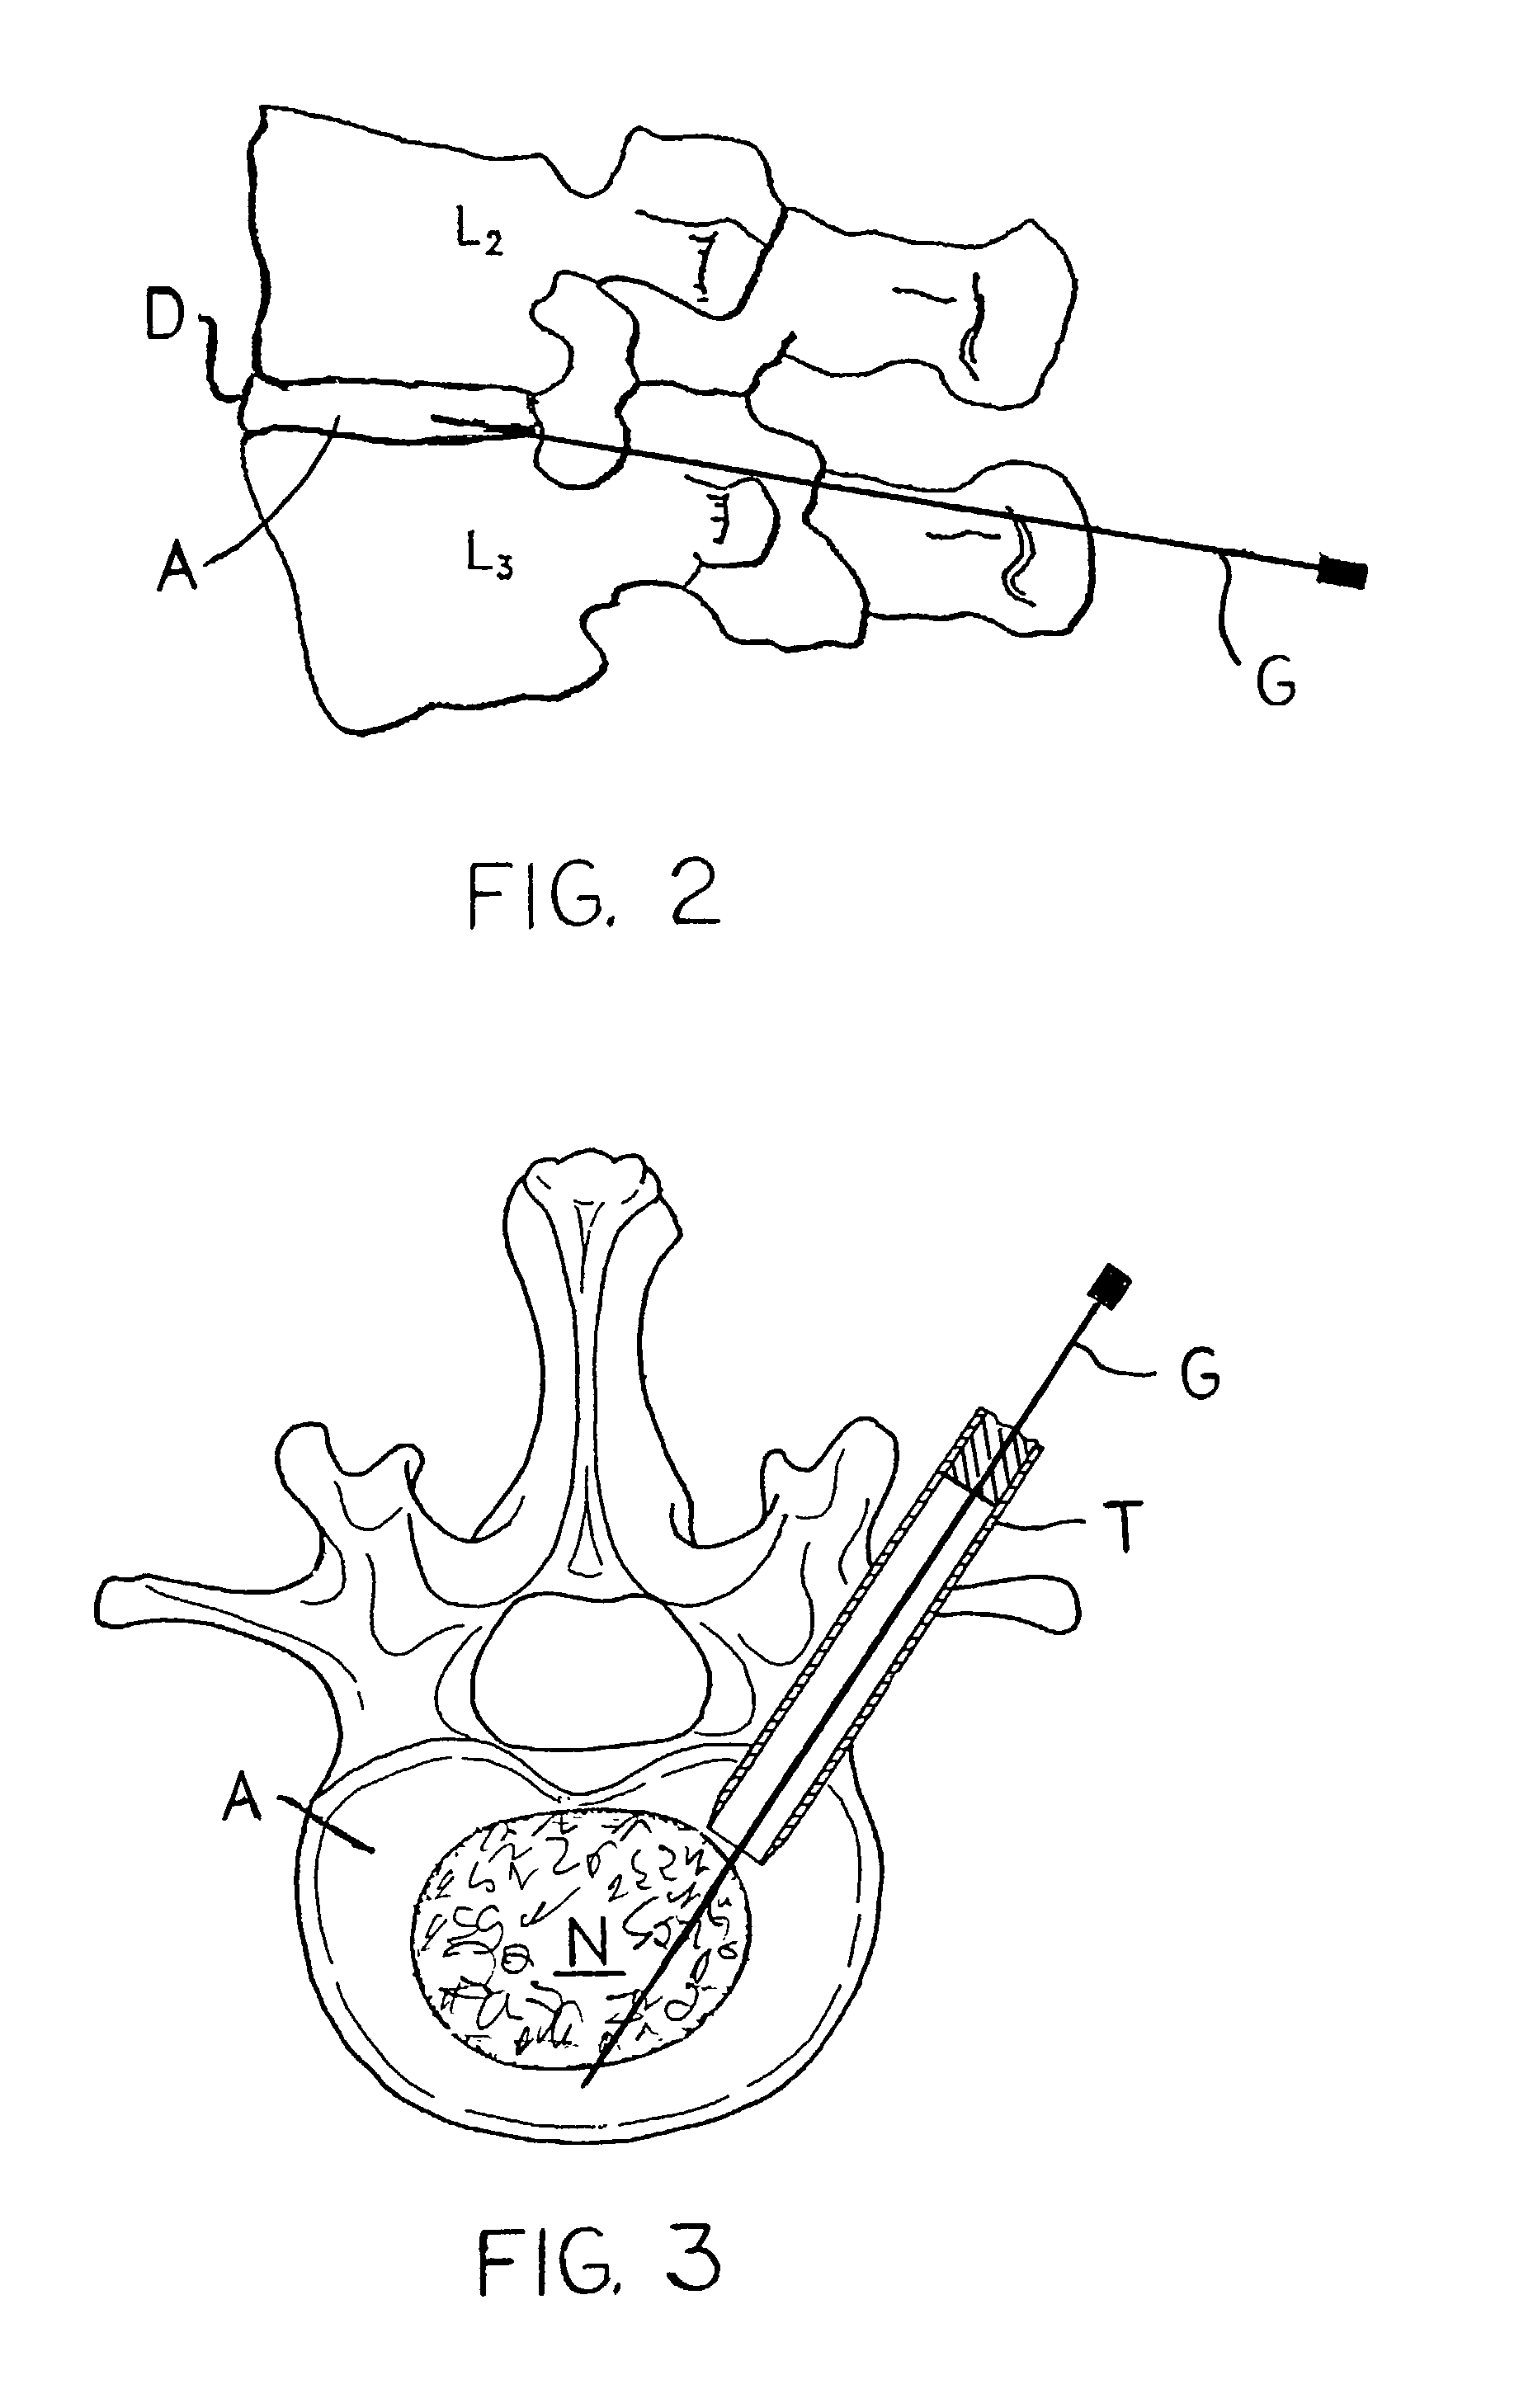 Devices and methods for the restoration of a spinal disc